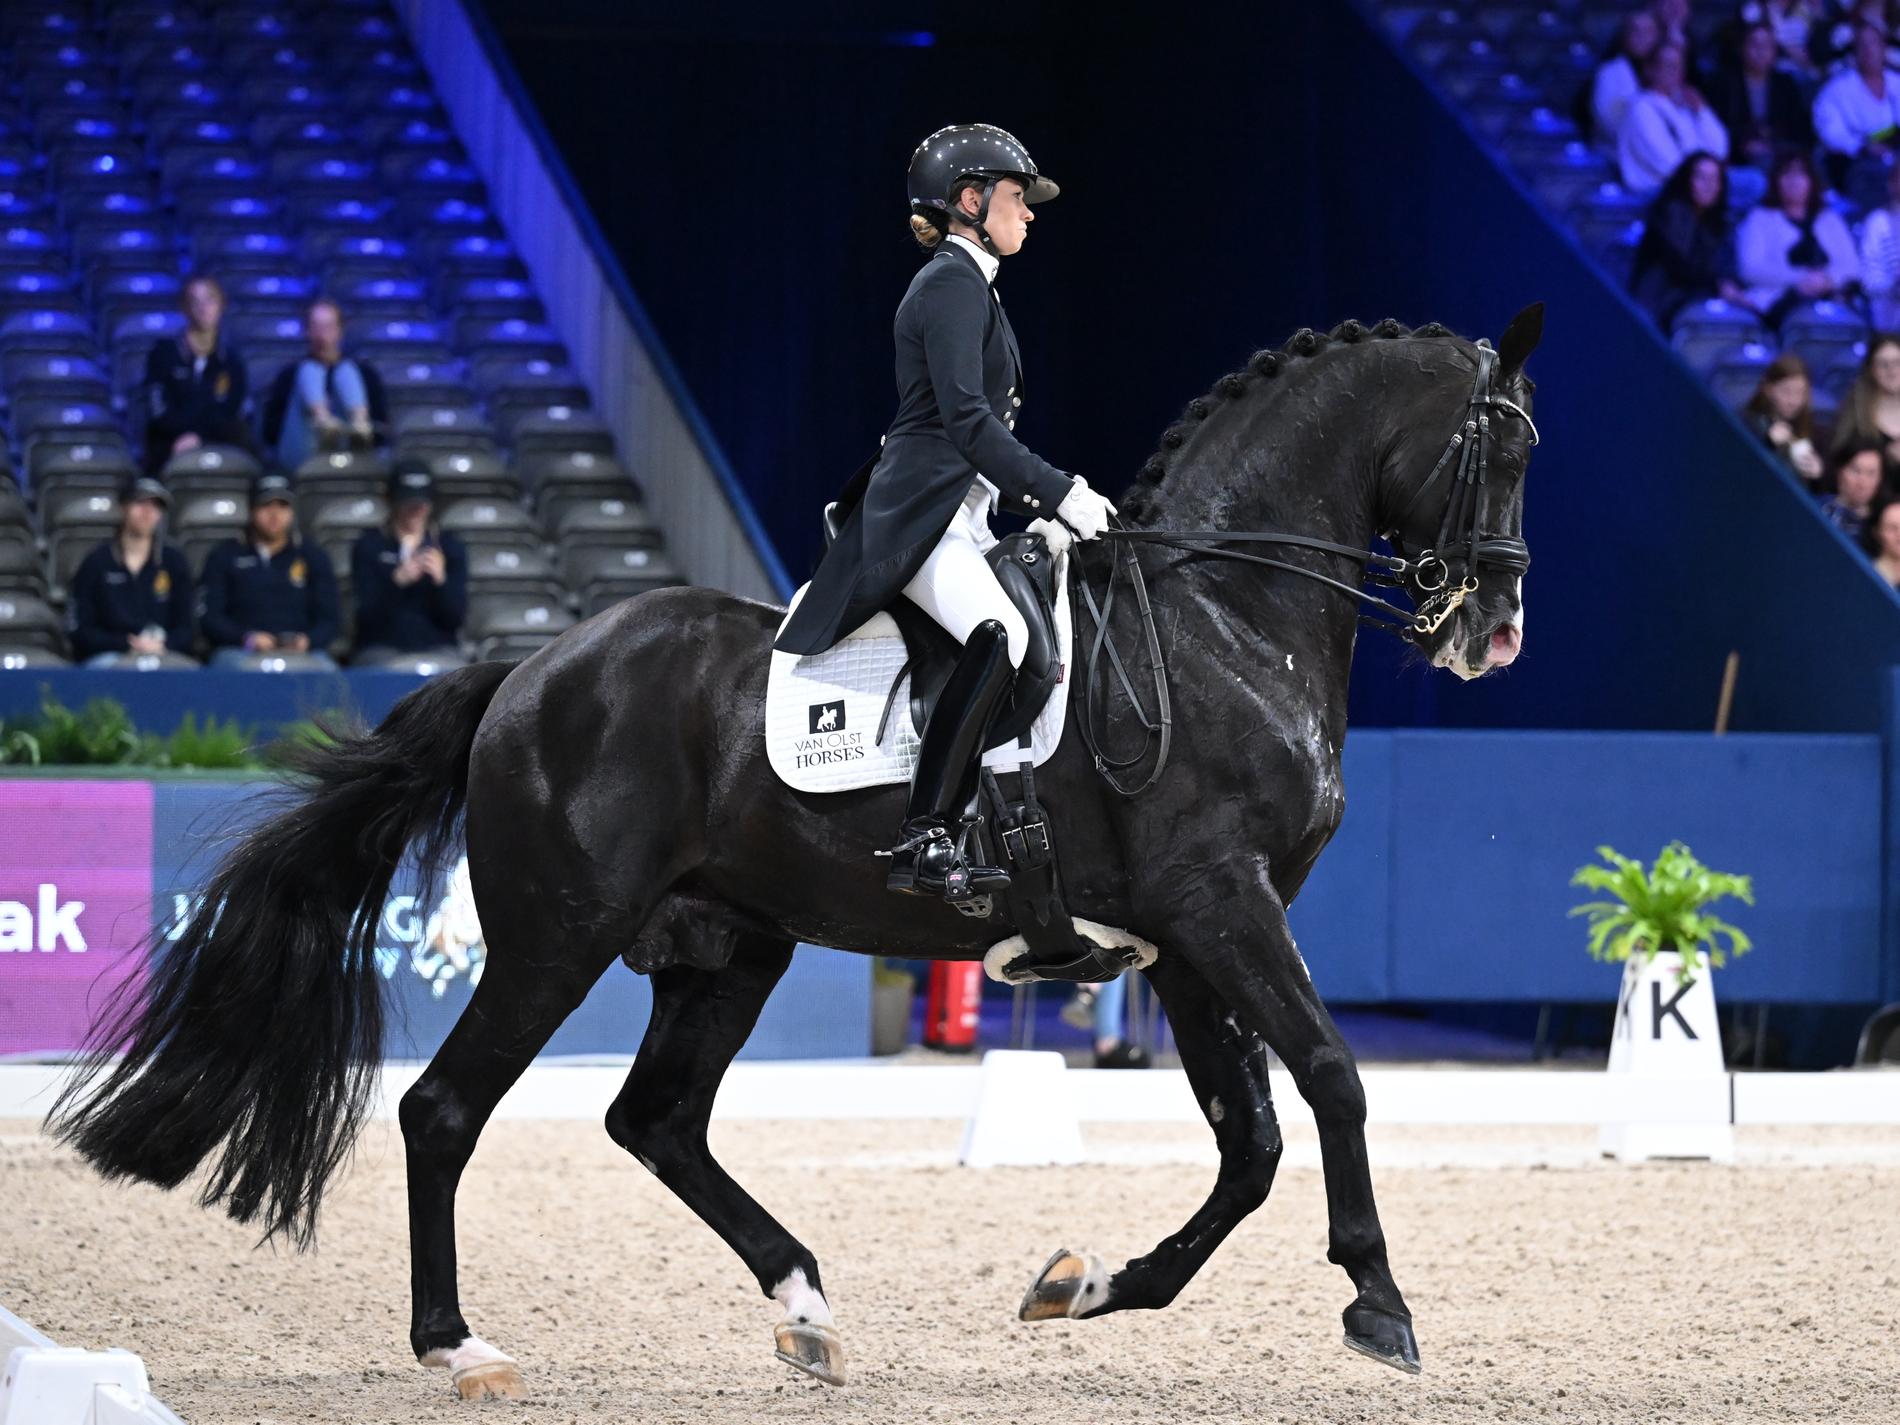 Charlotte Fry rode the horse Everdale to victory in Amsterdam. When Professor Paul McGreevy analyzed this image of the pair, he pointed out that the horse's tongue shows signs of oxygen deprivation.